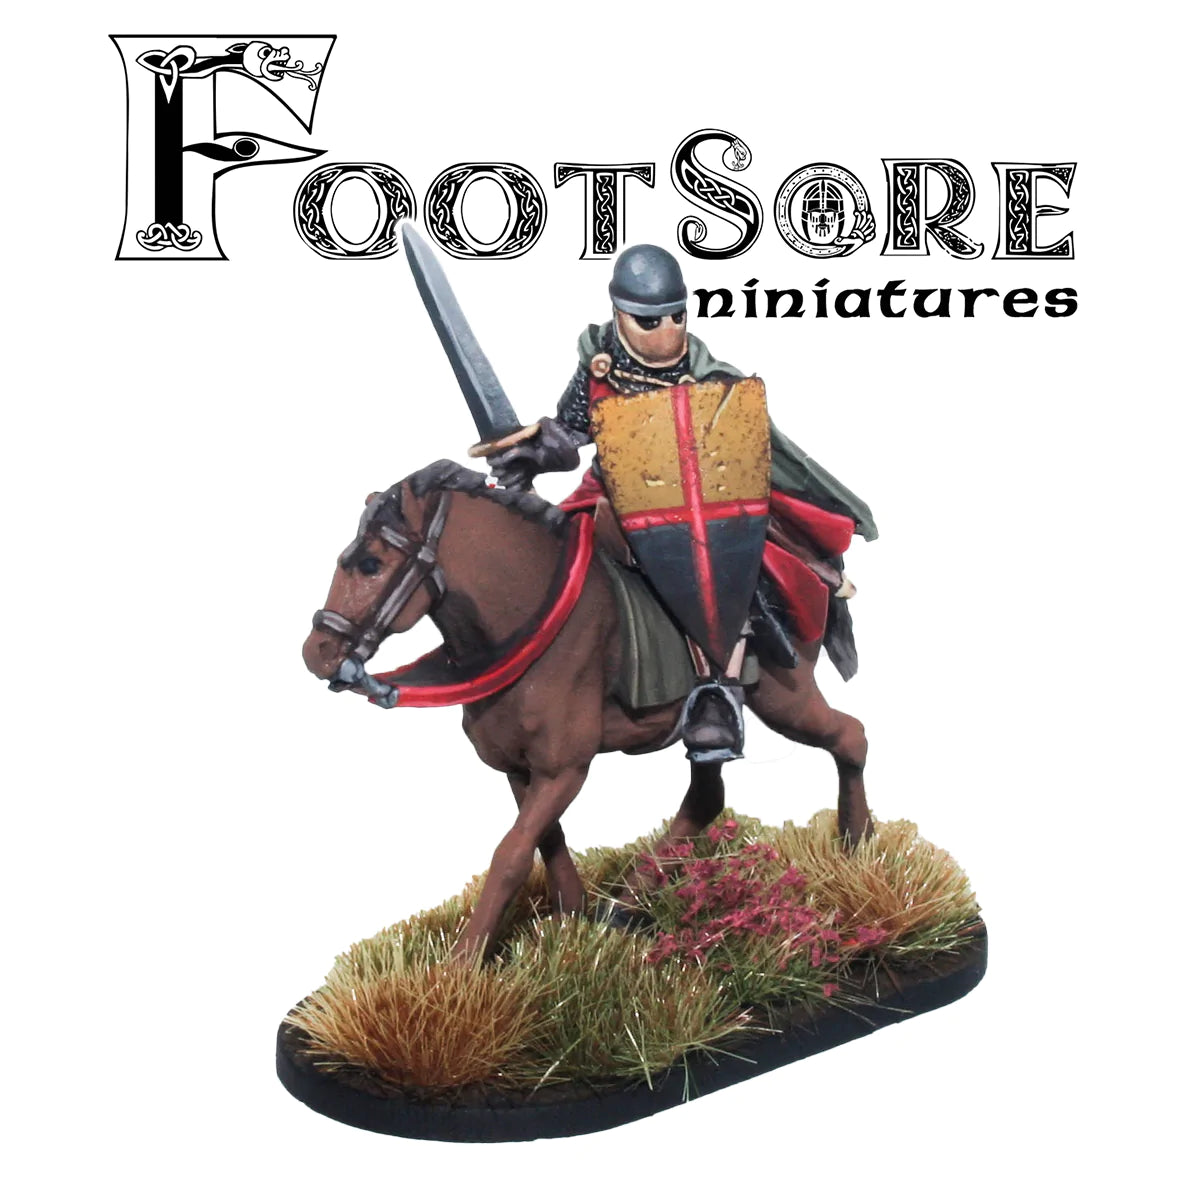 Welsh Mounted Medieval Commander: Footsore Miniatures